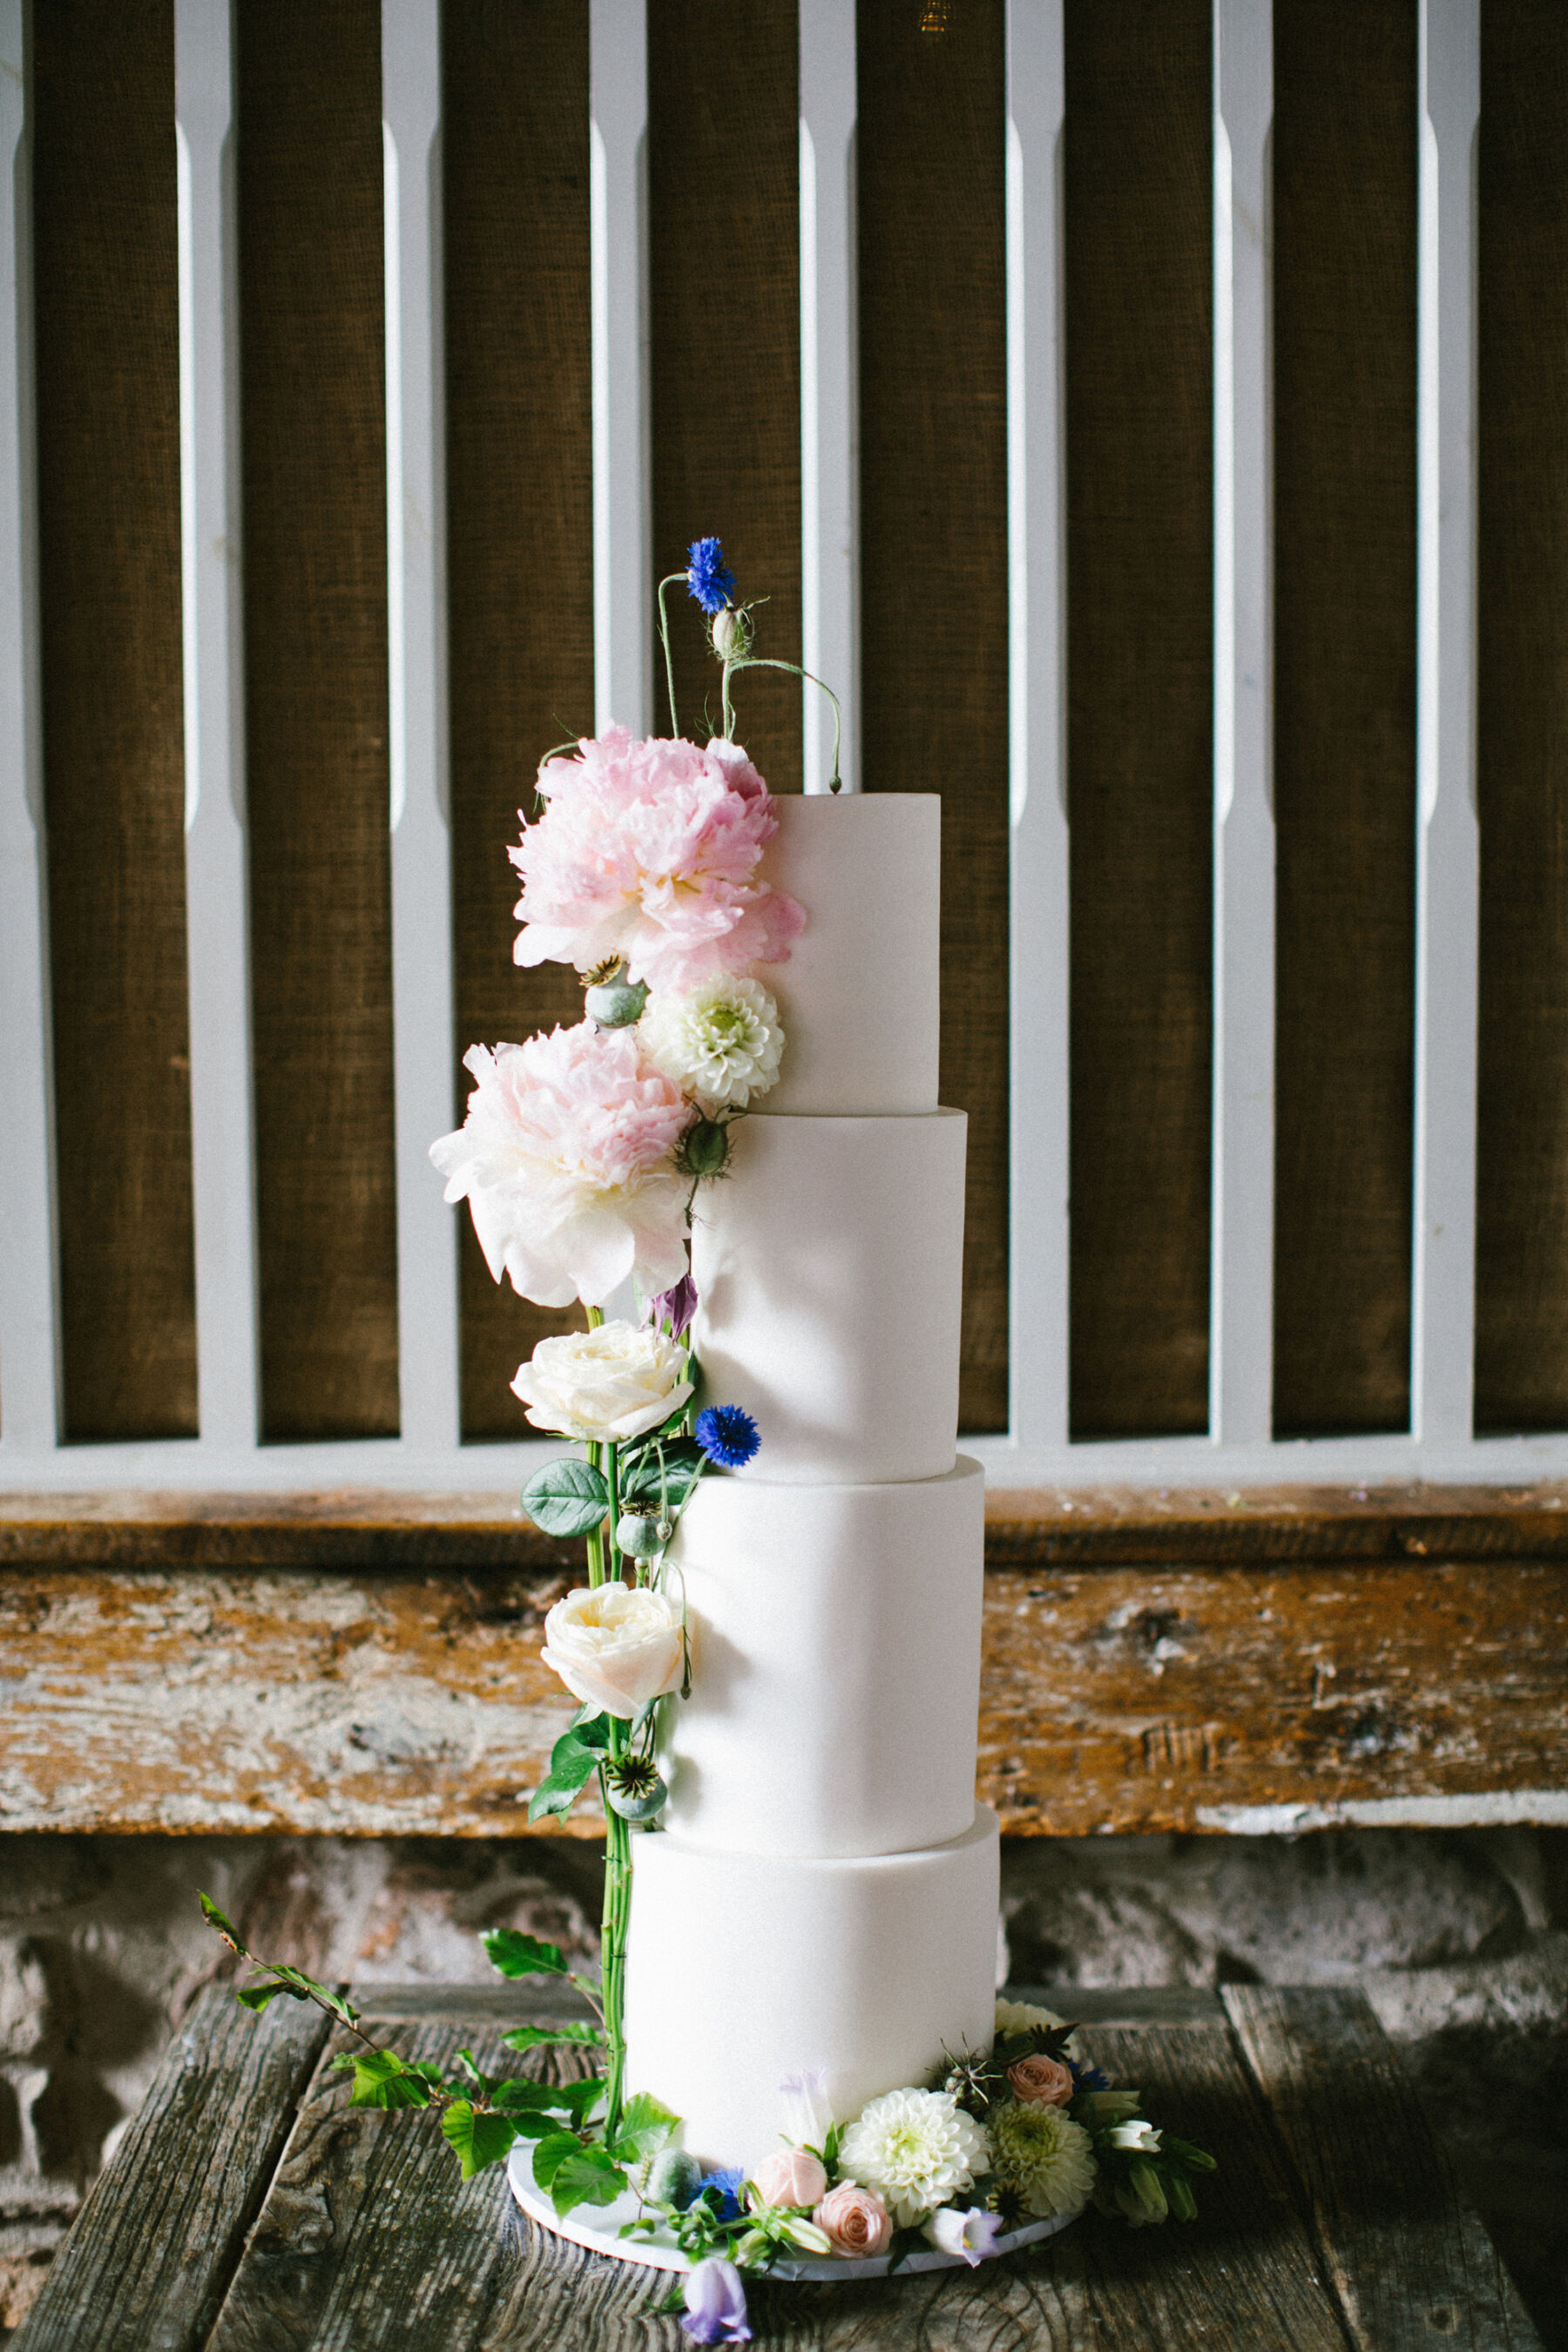 4 tier wedding cake - large tall tiers, decorated with summer peonies.